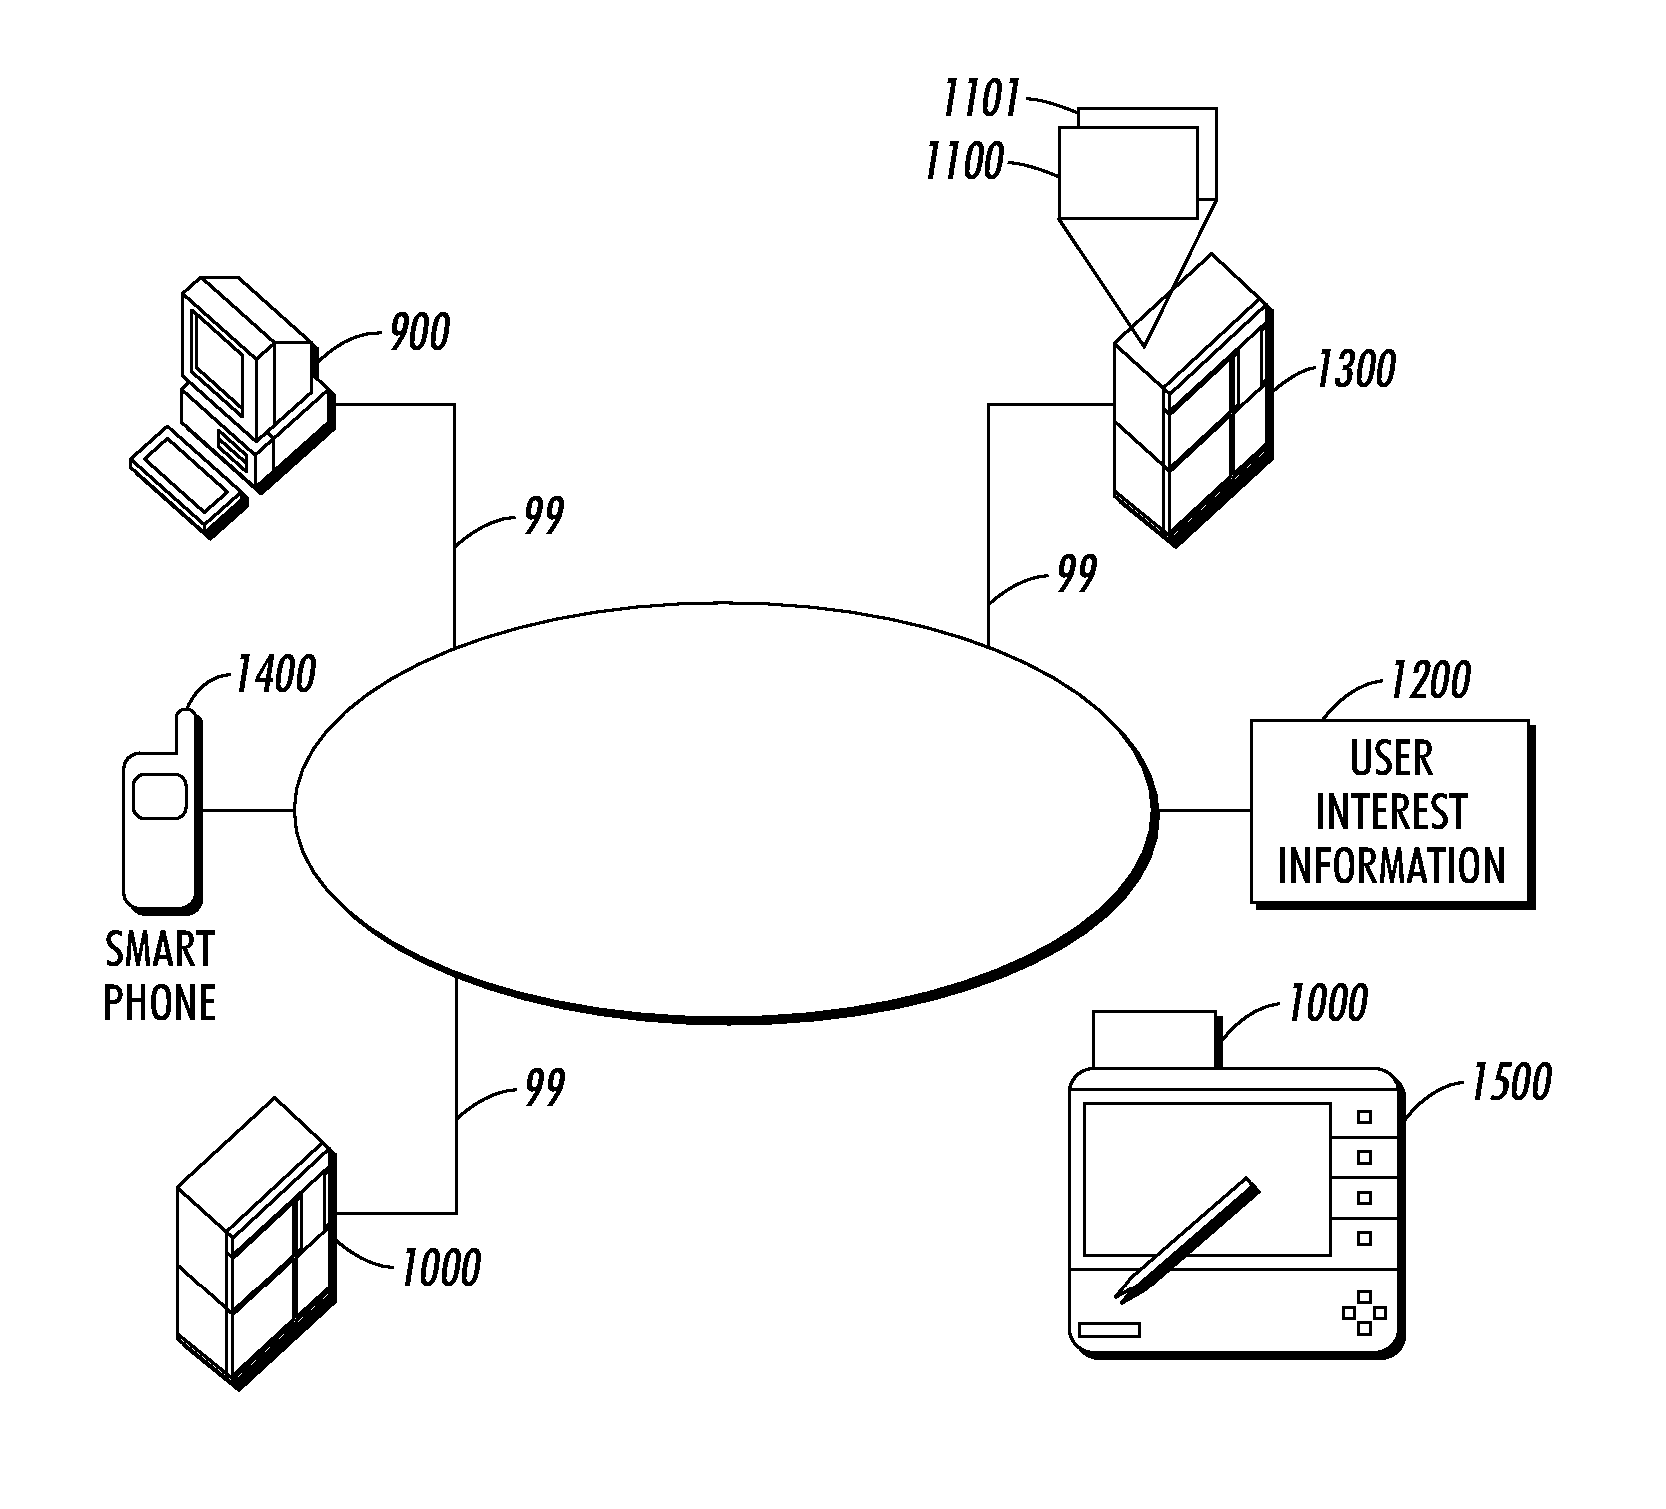 Systems and methods for using and constructing user-interest sensitive indicators of search results